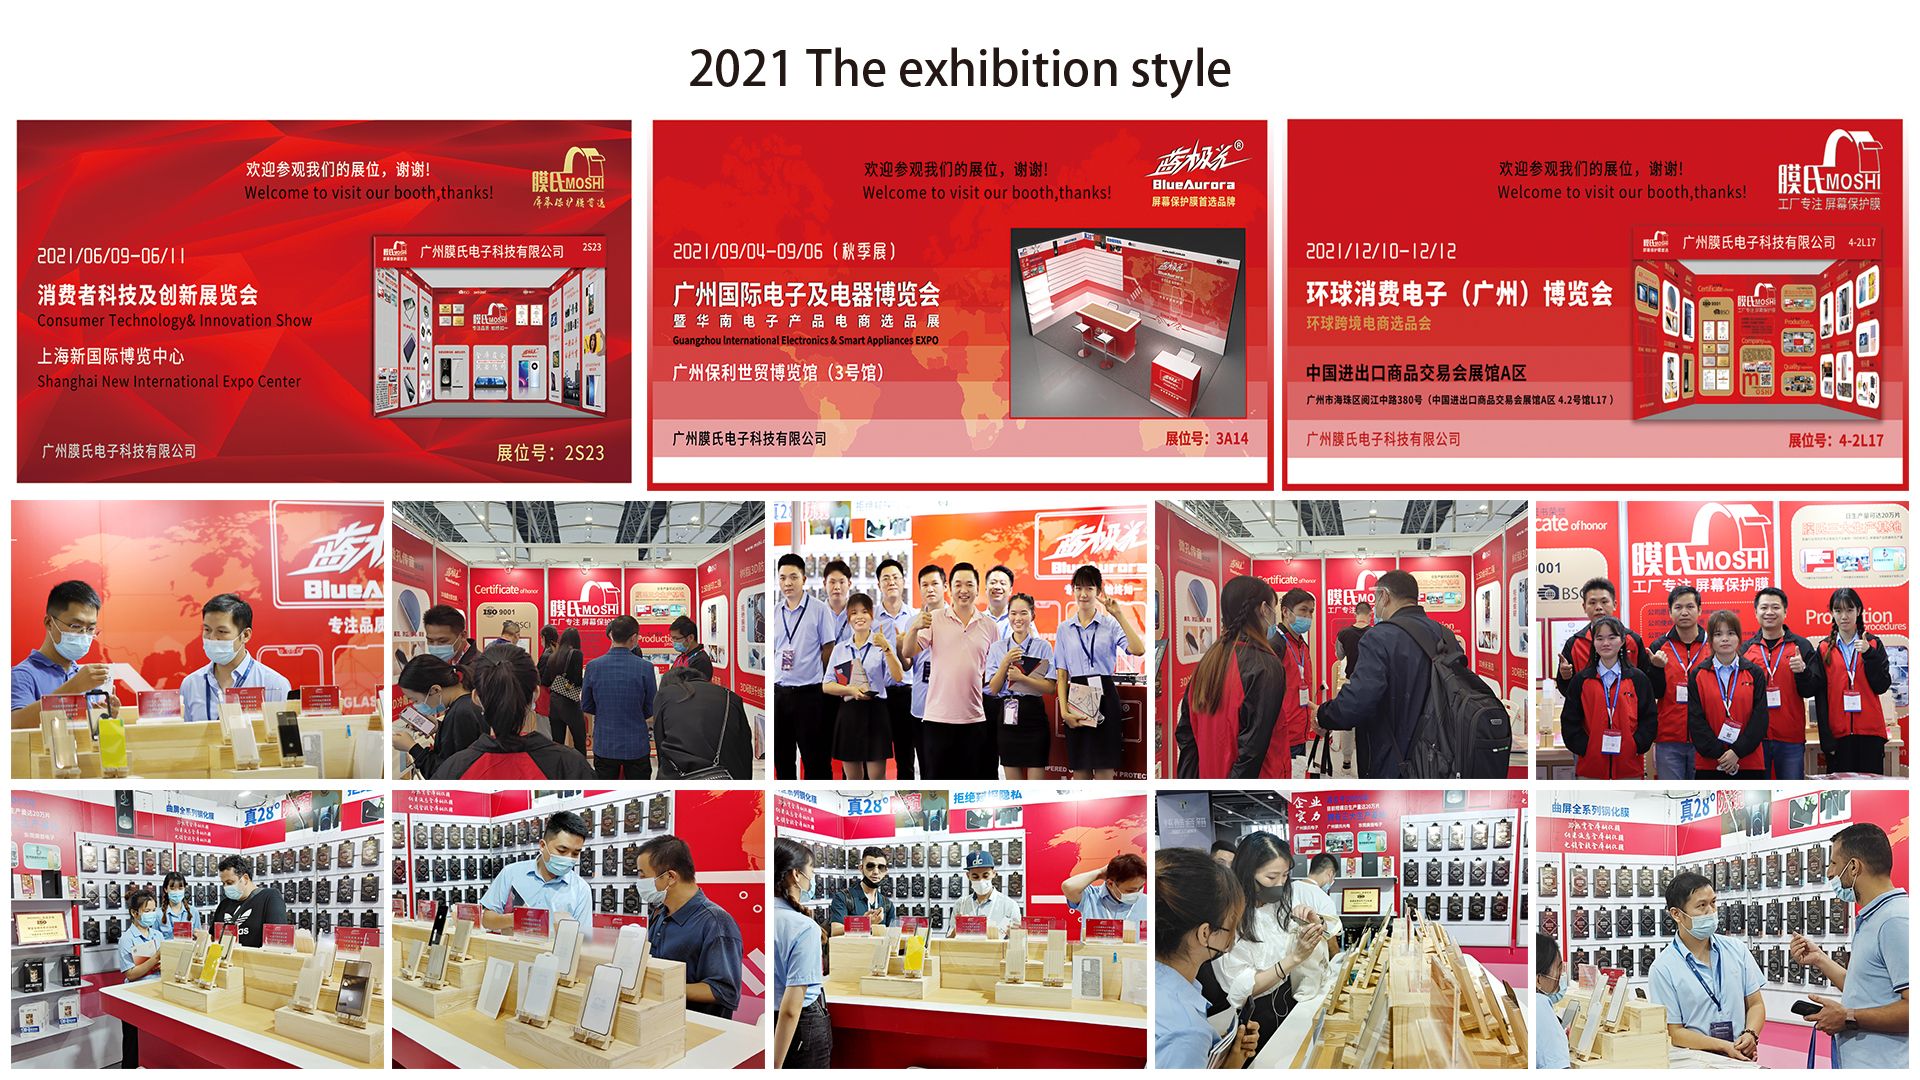 WEB-2021-The-Exhibition-Style